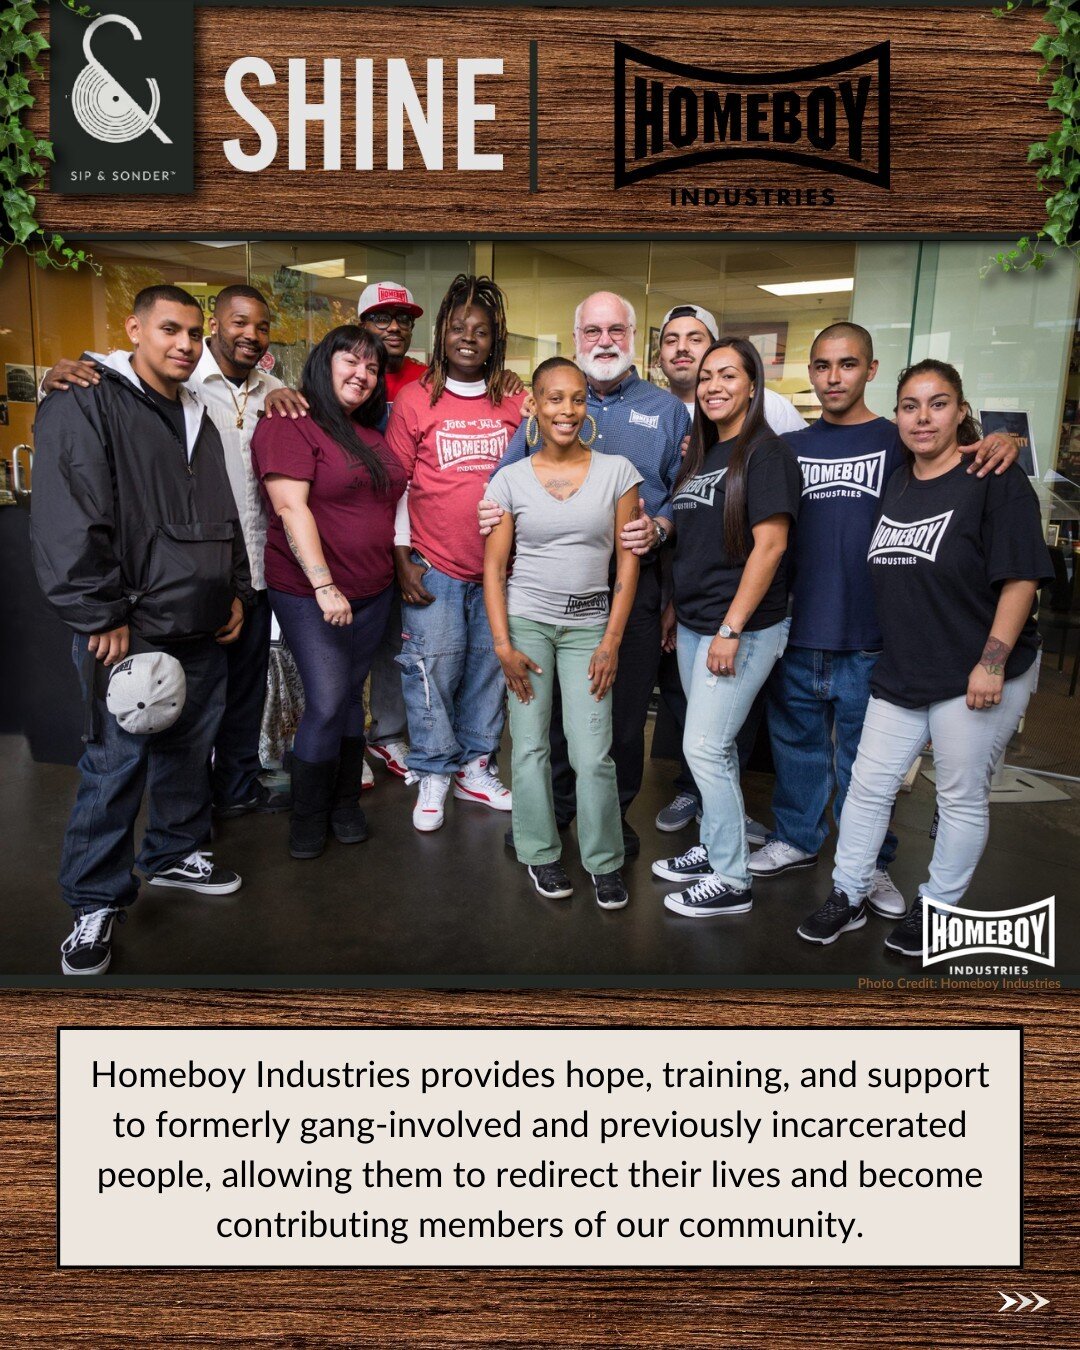 ⭐️ SHINE: Spotlight on @HomeboyIndustries! @SipandSonder proudly partners with @HomeboyIndustries to provide the community with delicious baked goods! 🥐 Homeboy Industries provides hope, training, and support to formerly gang-involved and previously